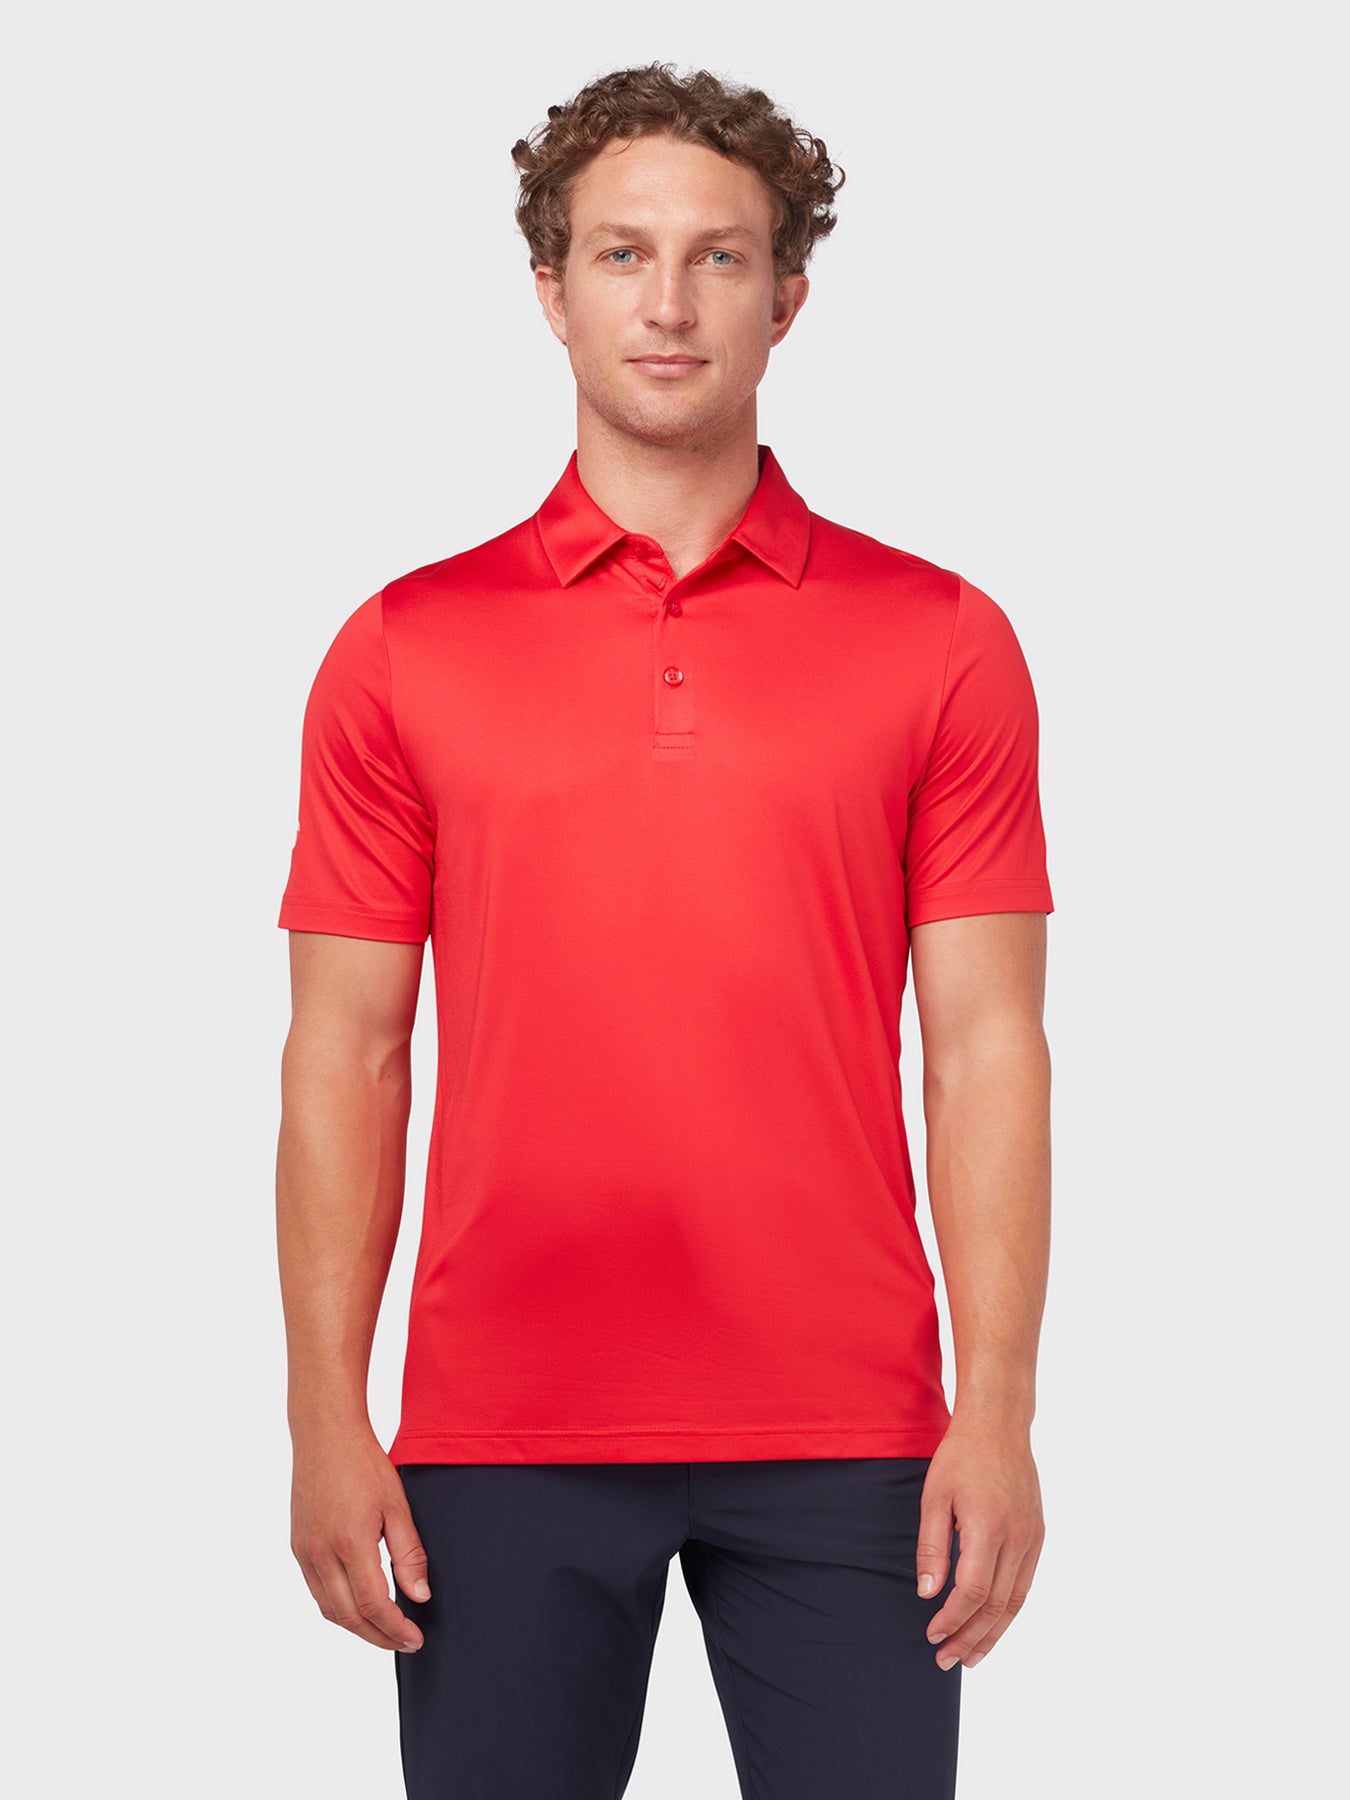 View Swing Tech Tour Polo In True Red True Red S information